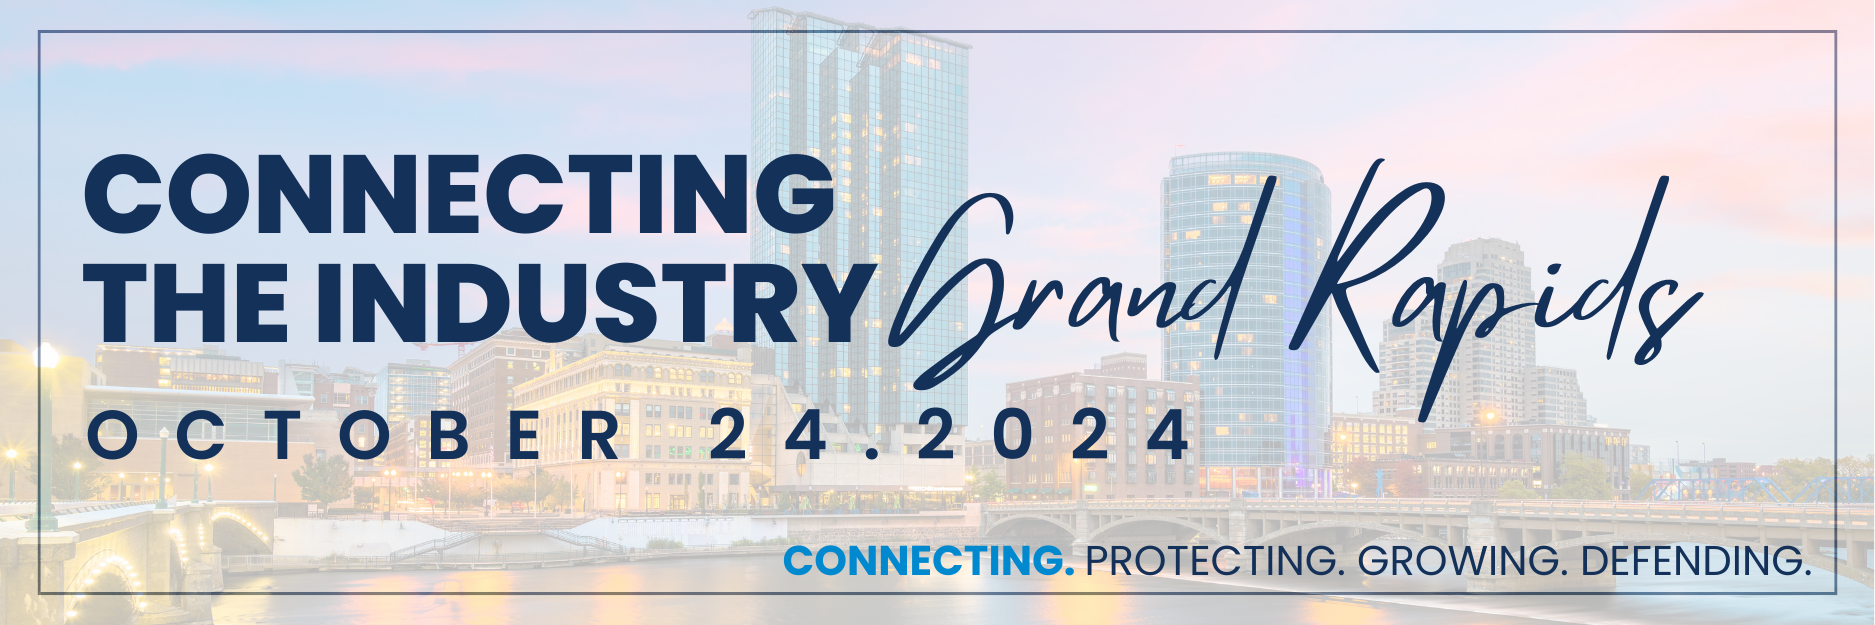 Connecting the Industry: Grand Rapids